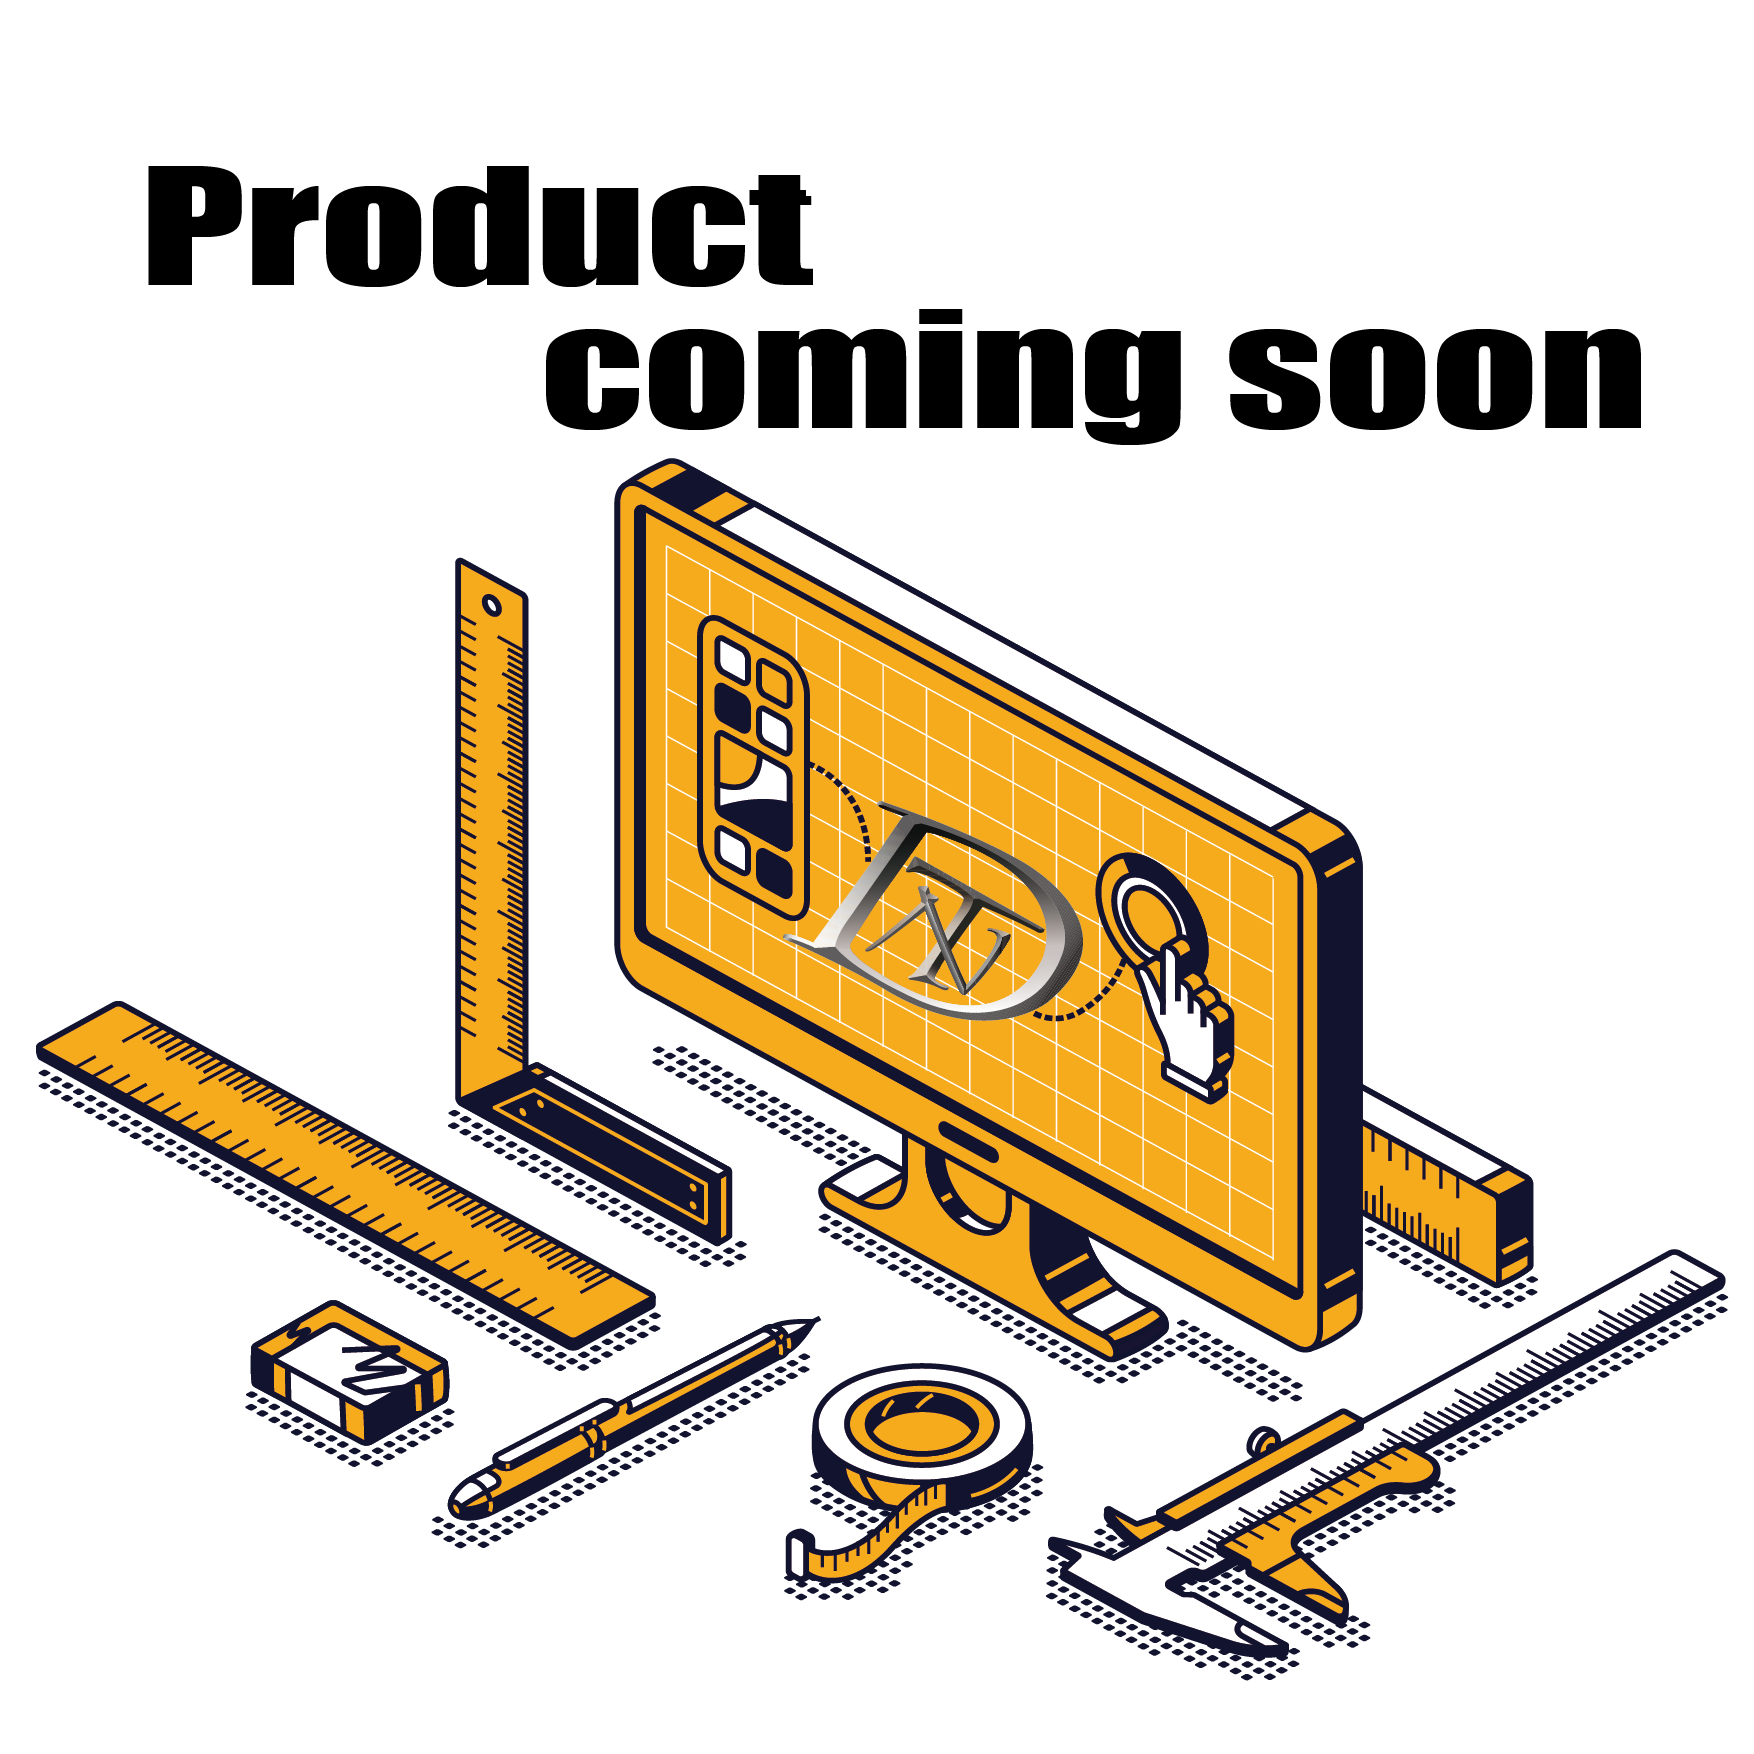 New products are being updated